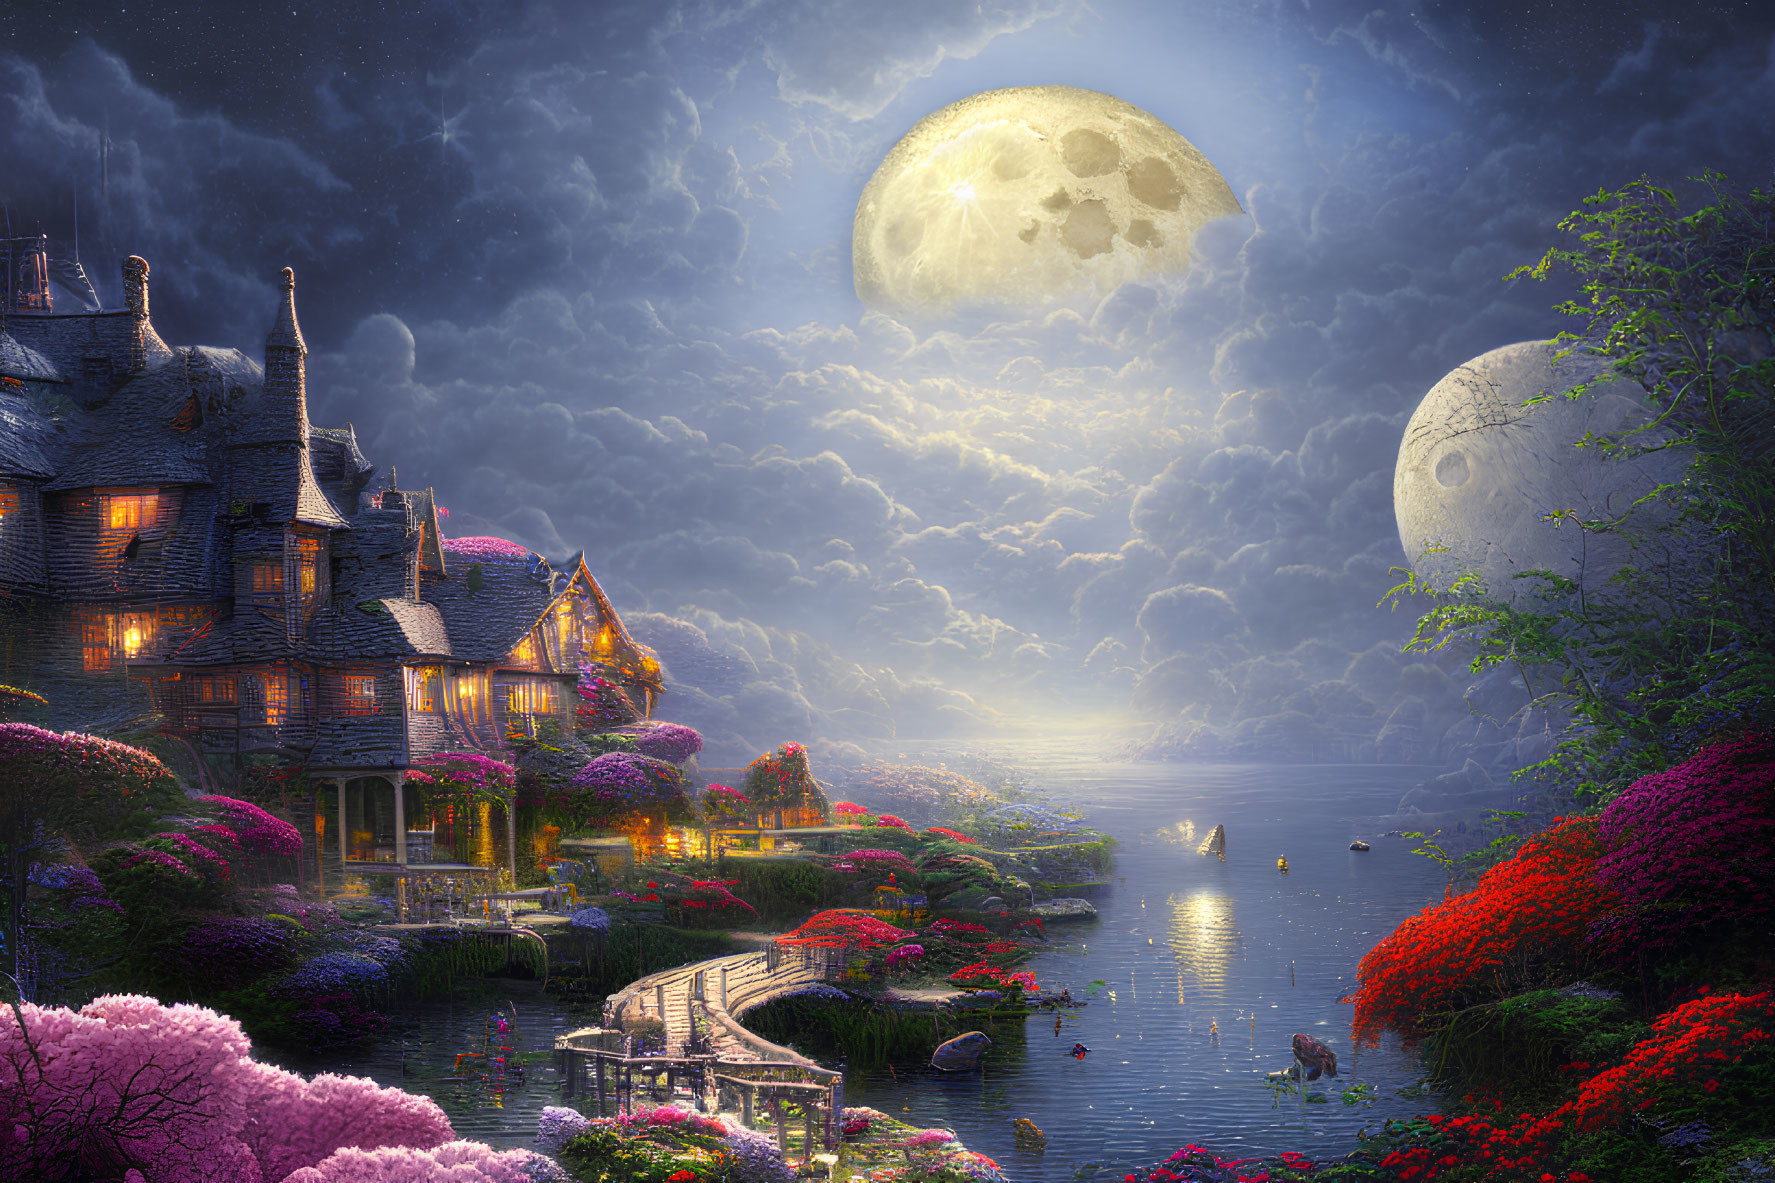 Fantasy landscape with grand house, vibrant flowers, tranquil river, and full moon